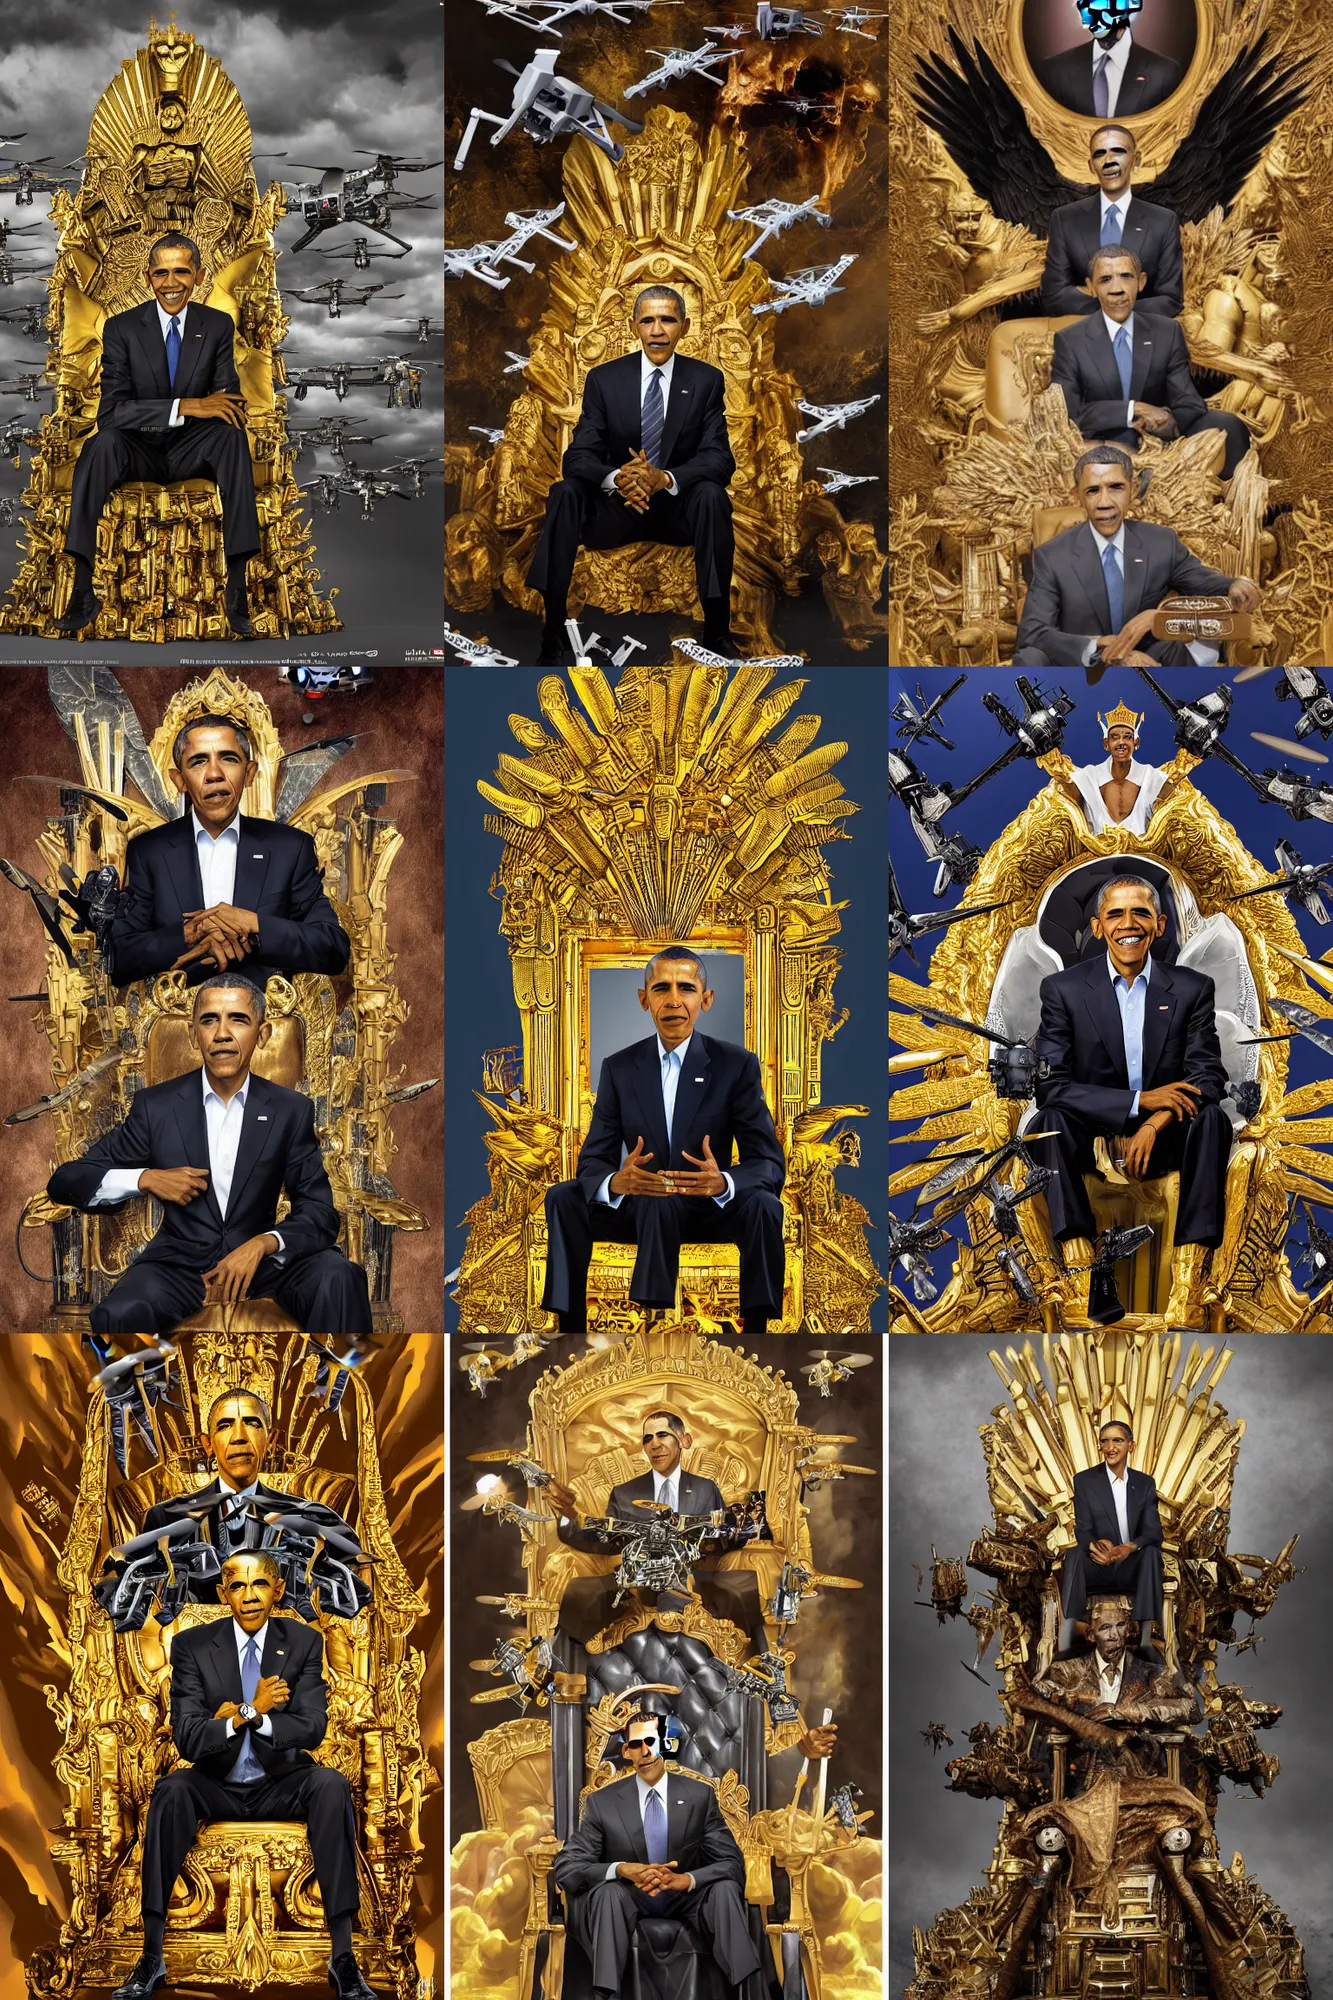 Prompt: grotesque concept art portrait of Barack Obama The Drone King sitting on a golden throne with MQ-1 Predator Drones (military) flying out from under it, Copyright TIME Magazine, (EOS 5DS R, ISO100, f/8, 1/125, 84mm, modelsociety, prime lense)